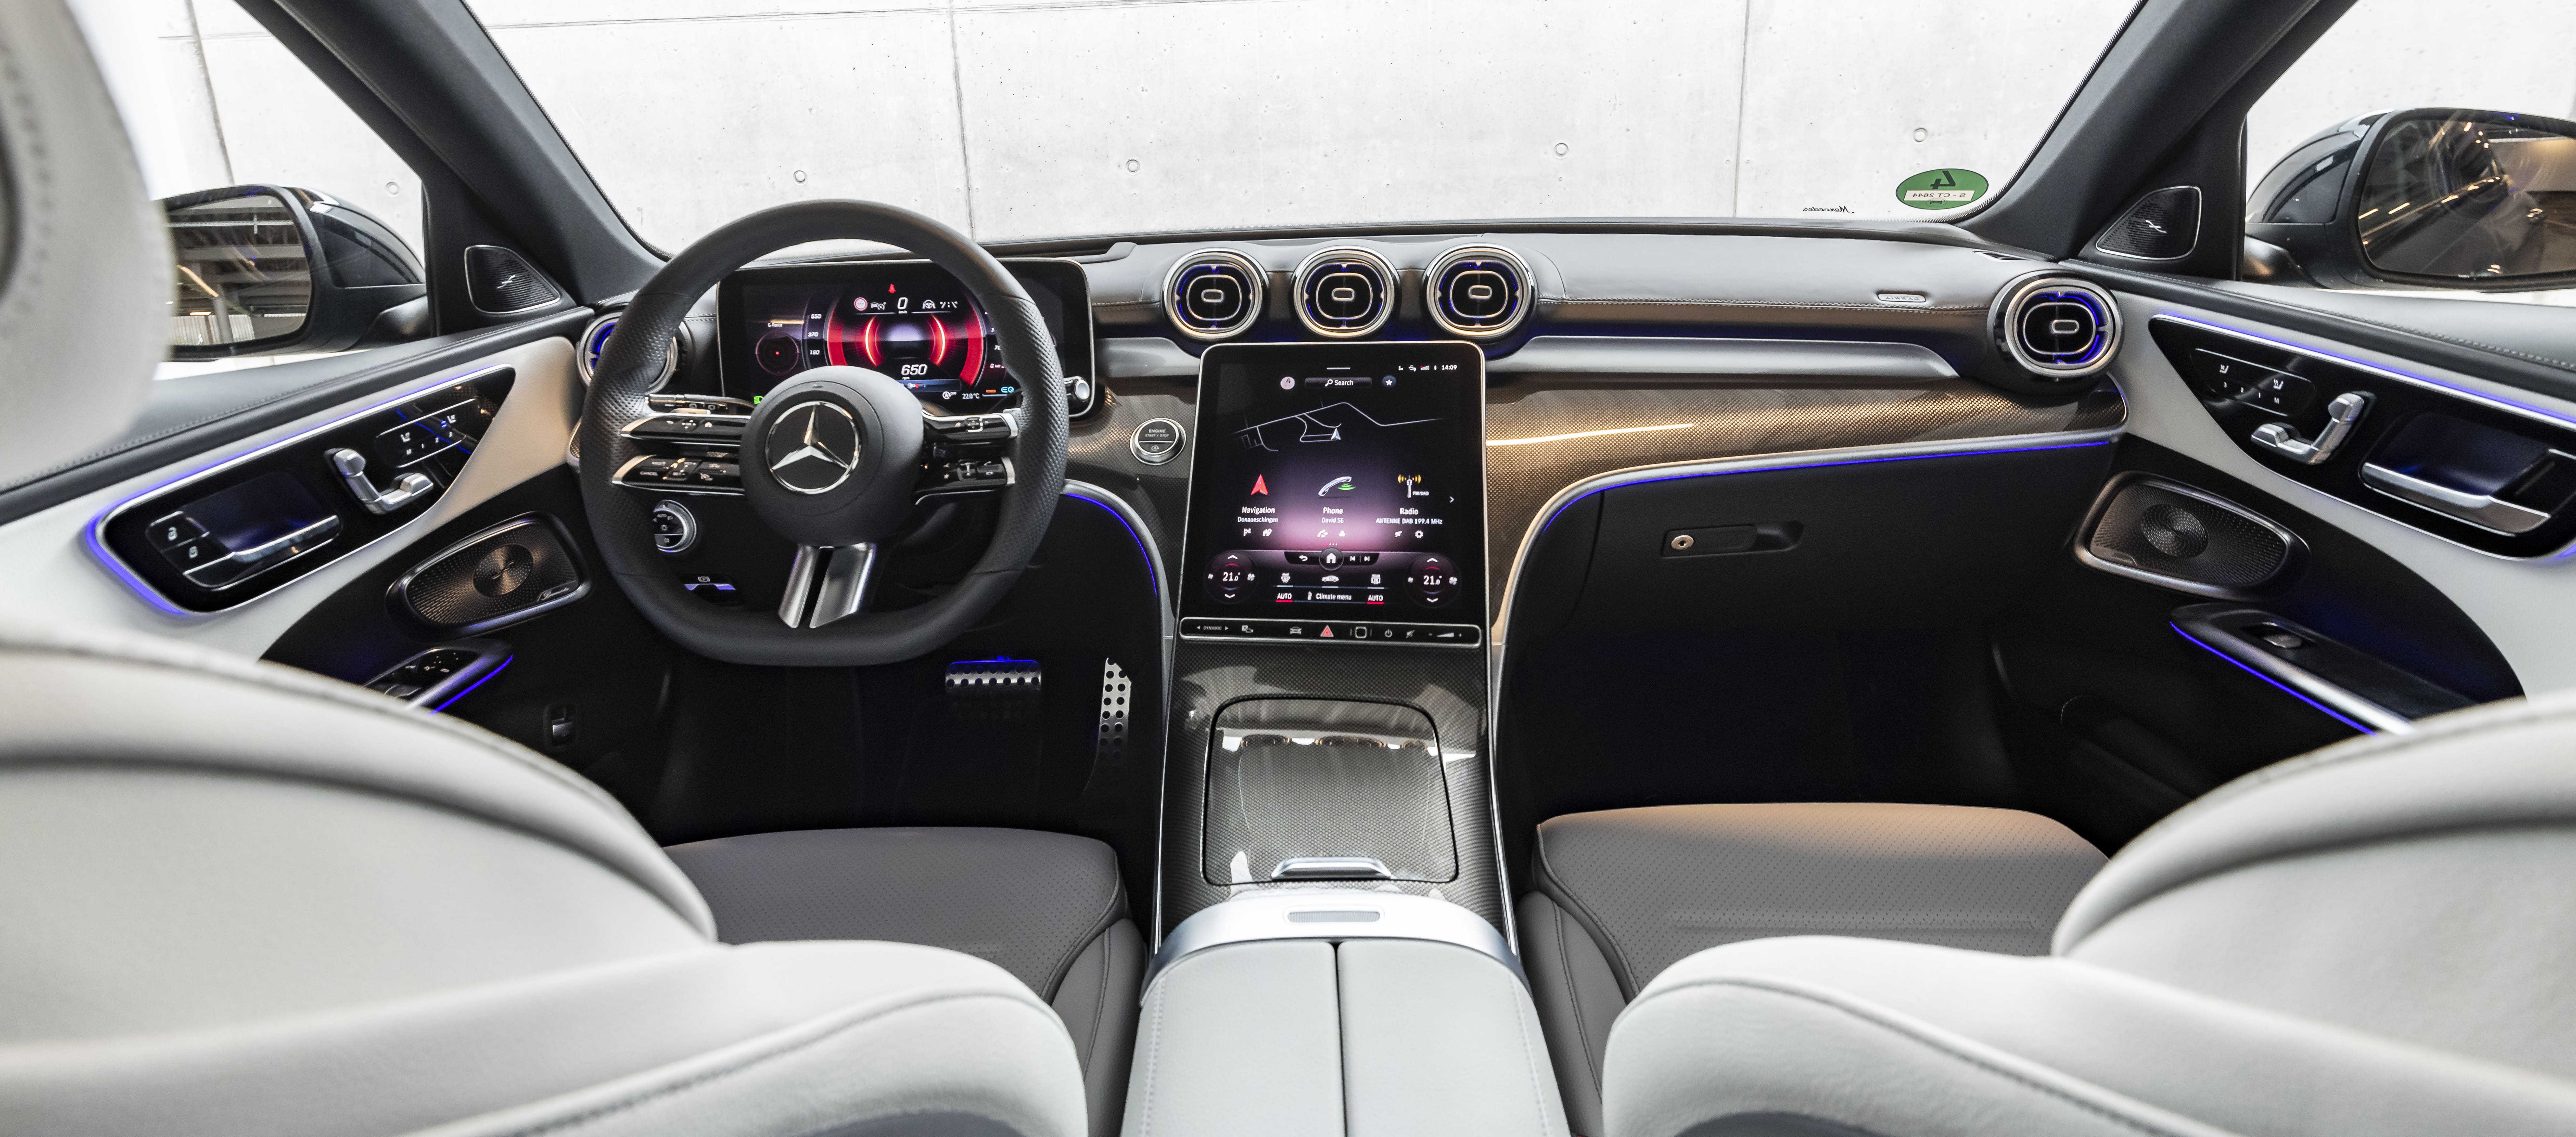 The Cabin of the Mercedes Benz C-Class